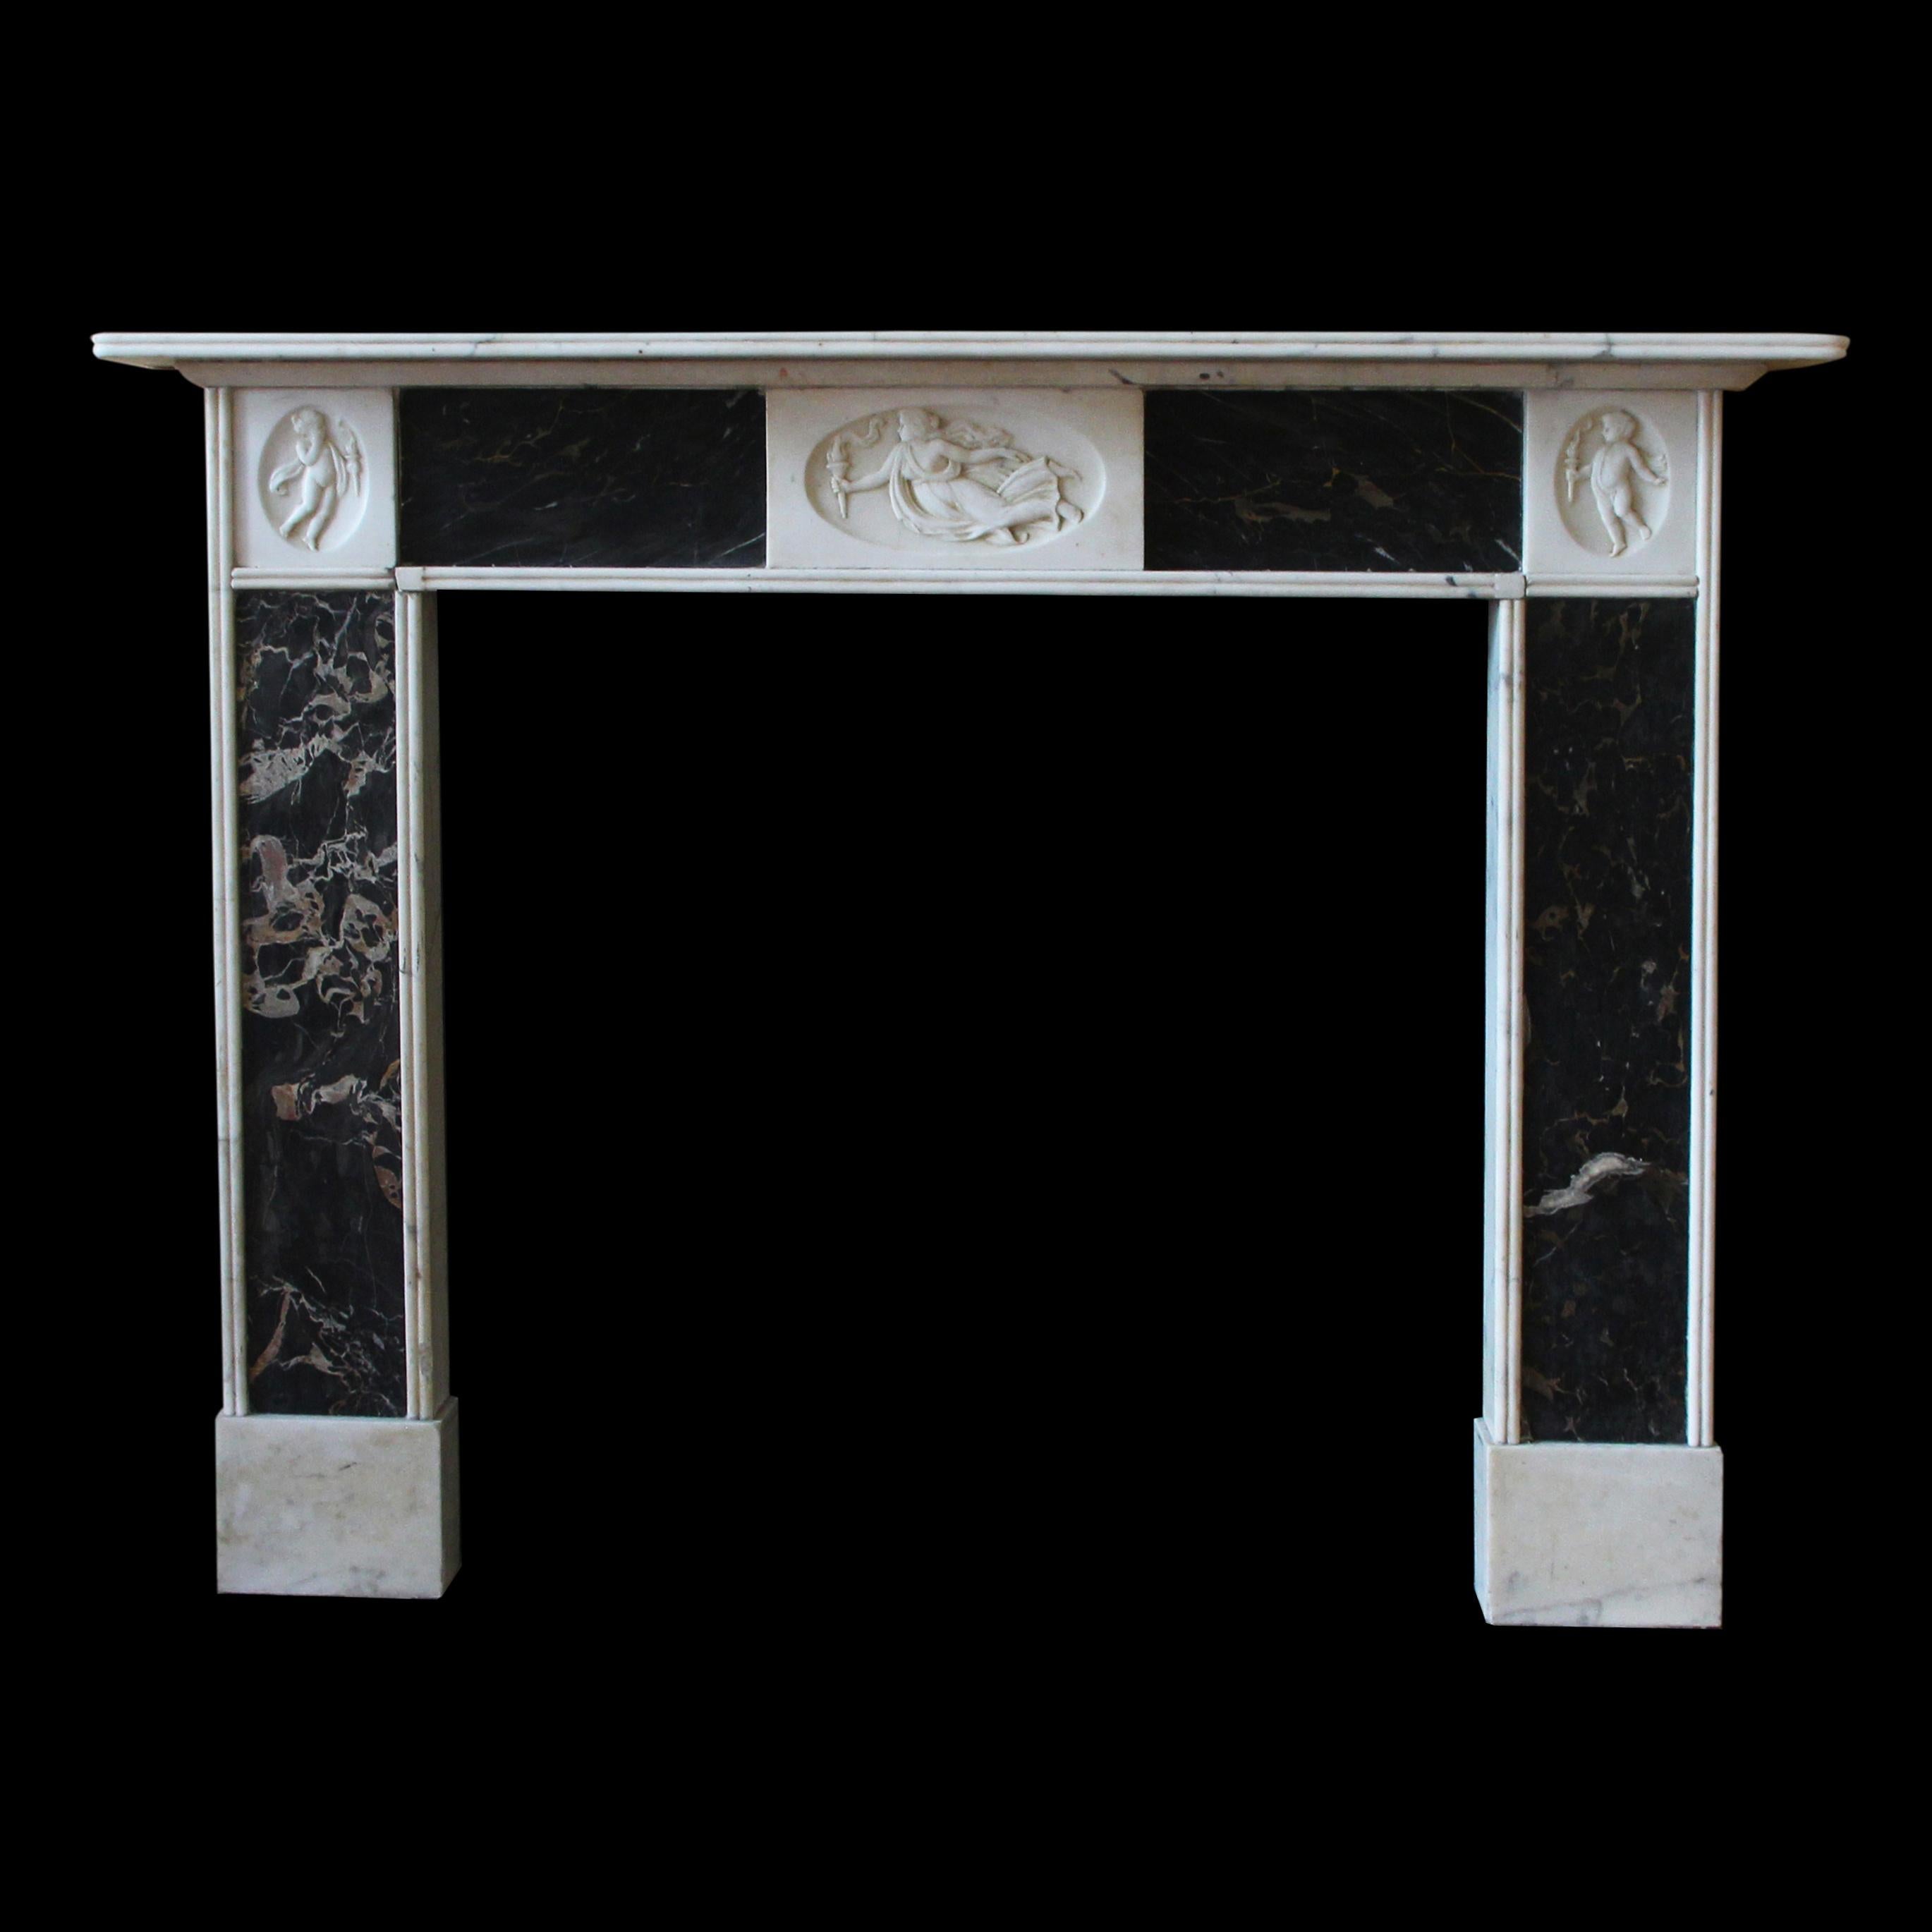 Italian black and gold Portoro marble mantel, crafted in the distinguished English Regency style. Adorned with skillfully carved statuary marble motifs depicting figures clutching torches, this mantel is a true work of art. The black marble's rich